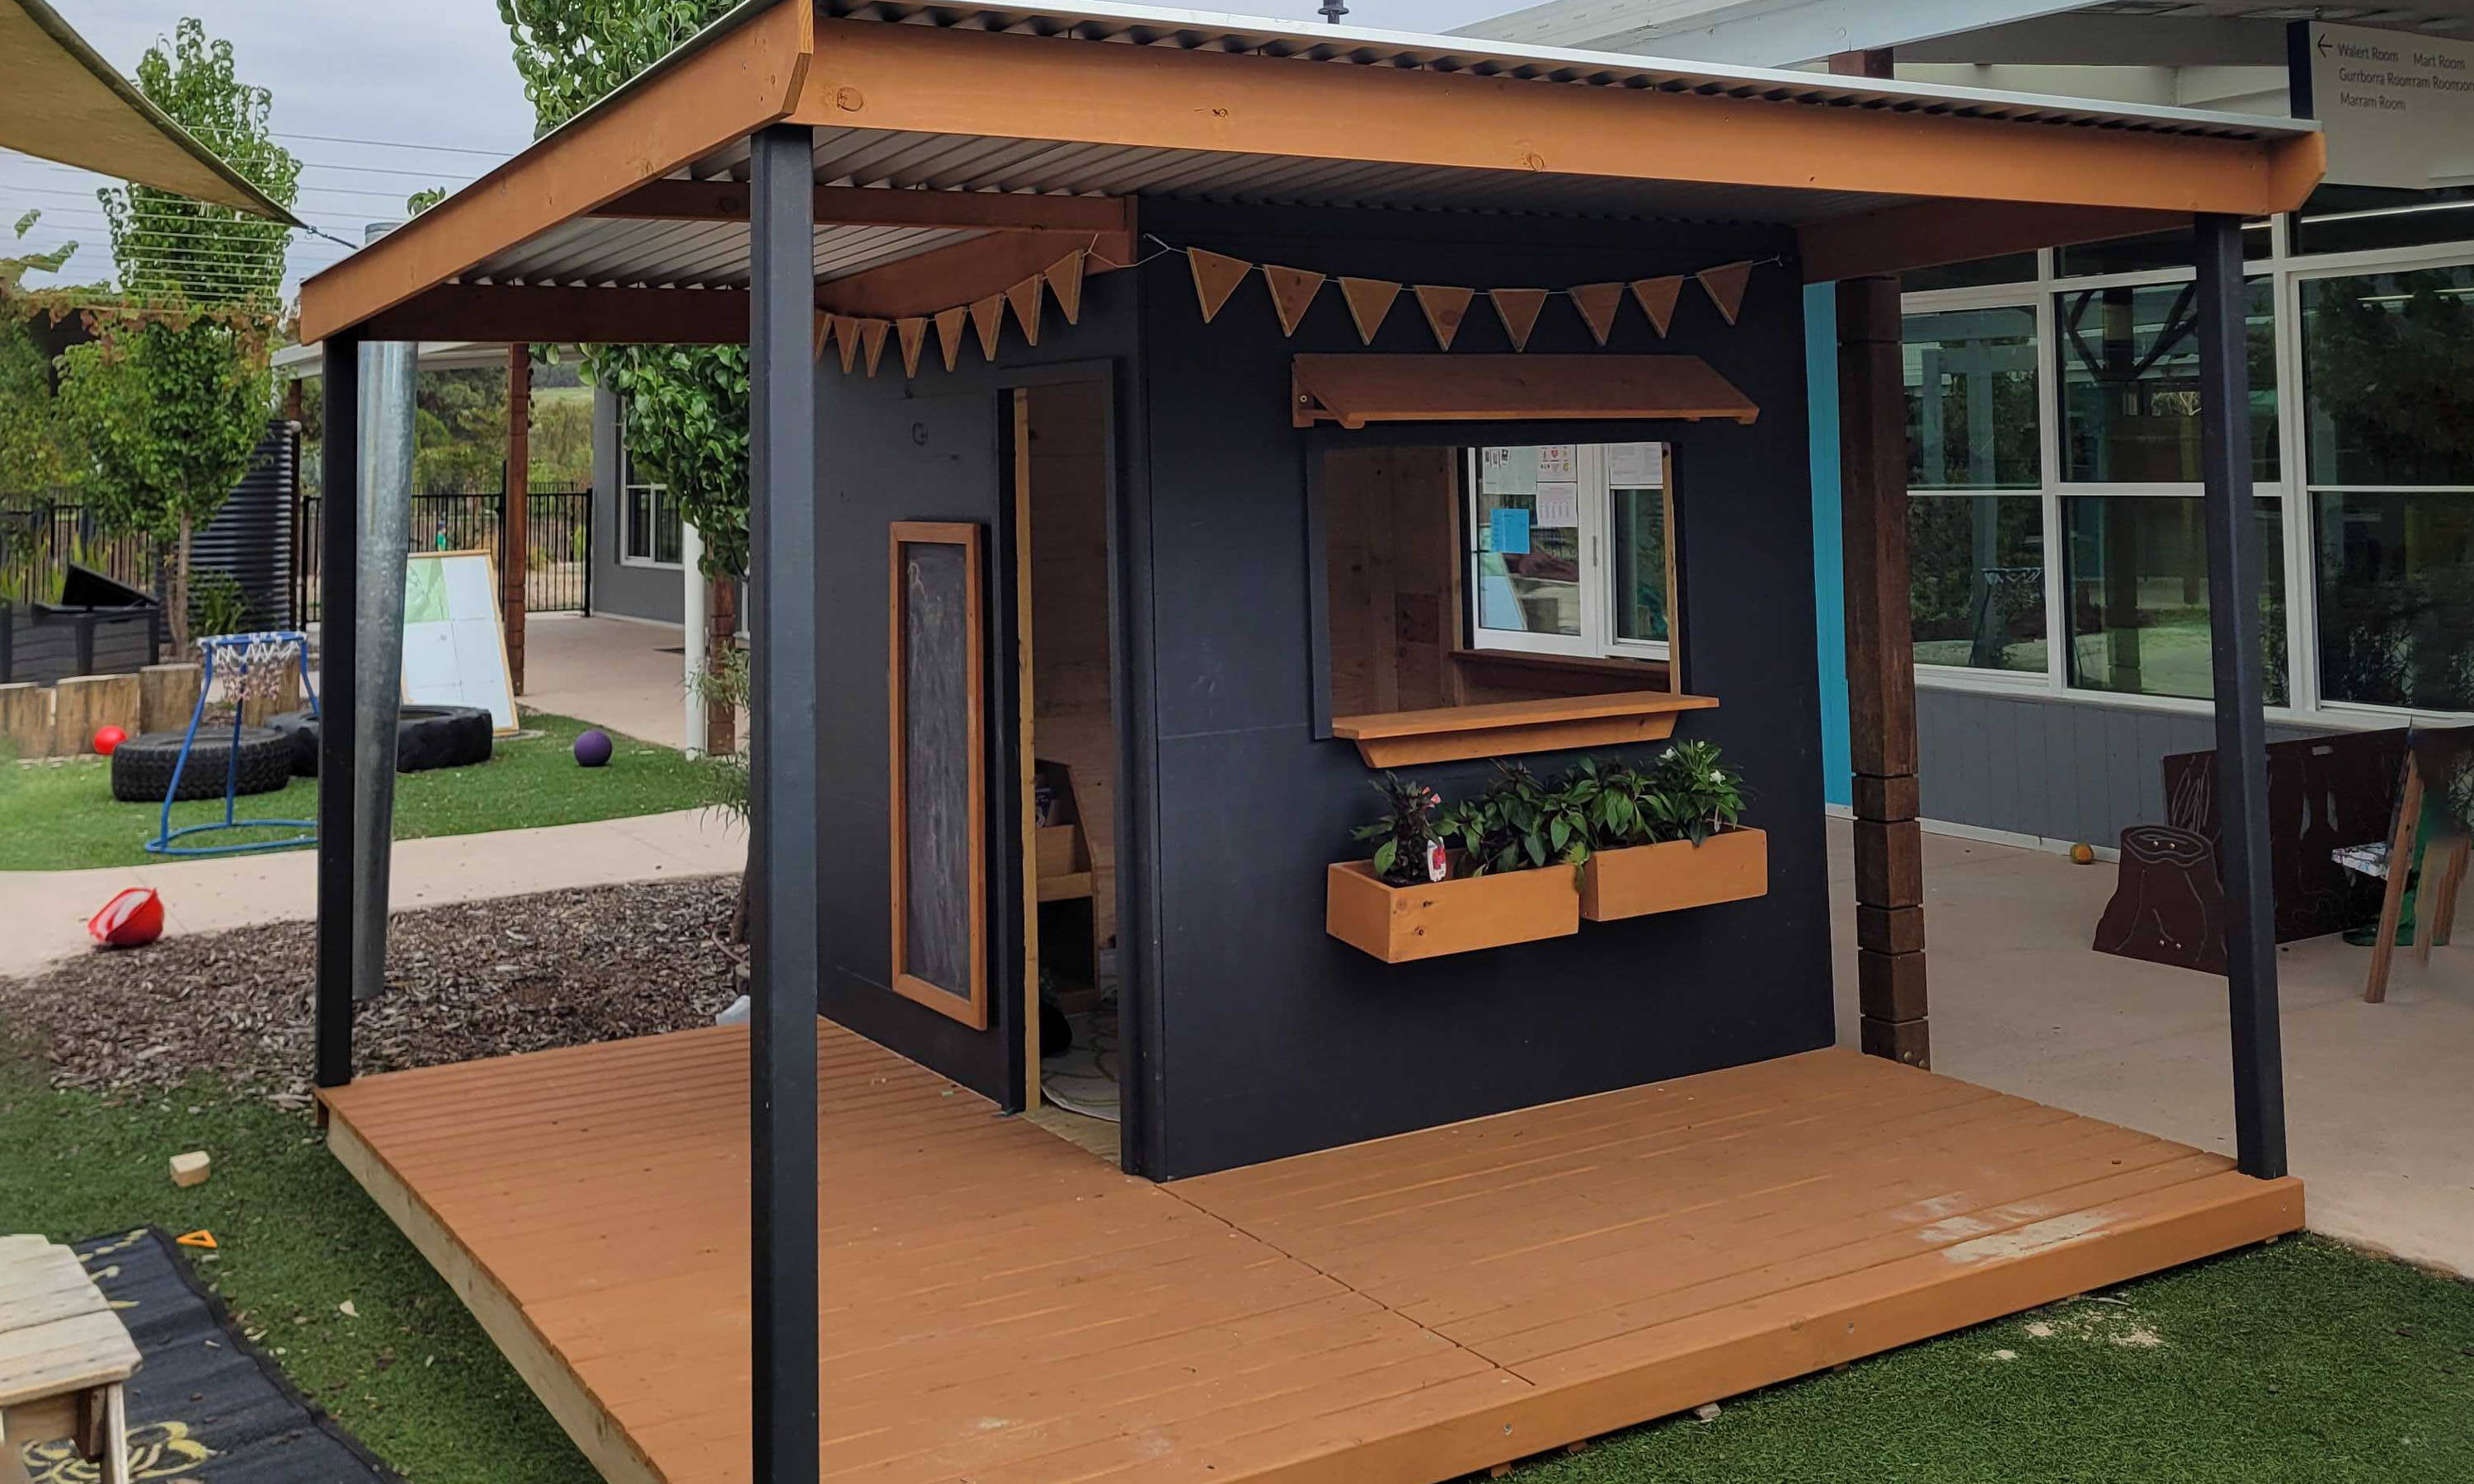 A painted wraparound verandah cubby house with a flat roof